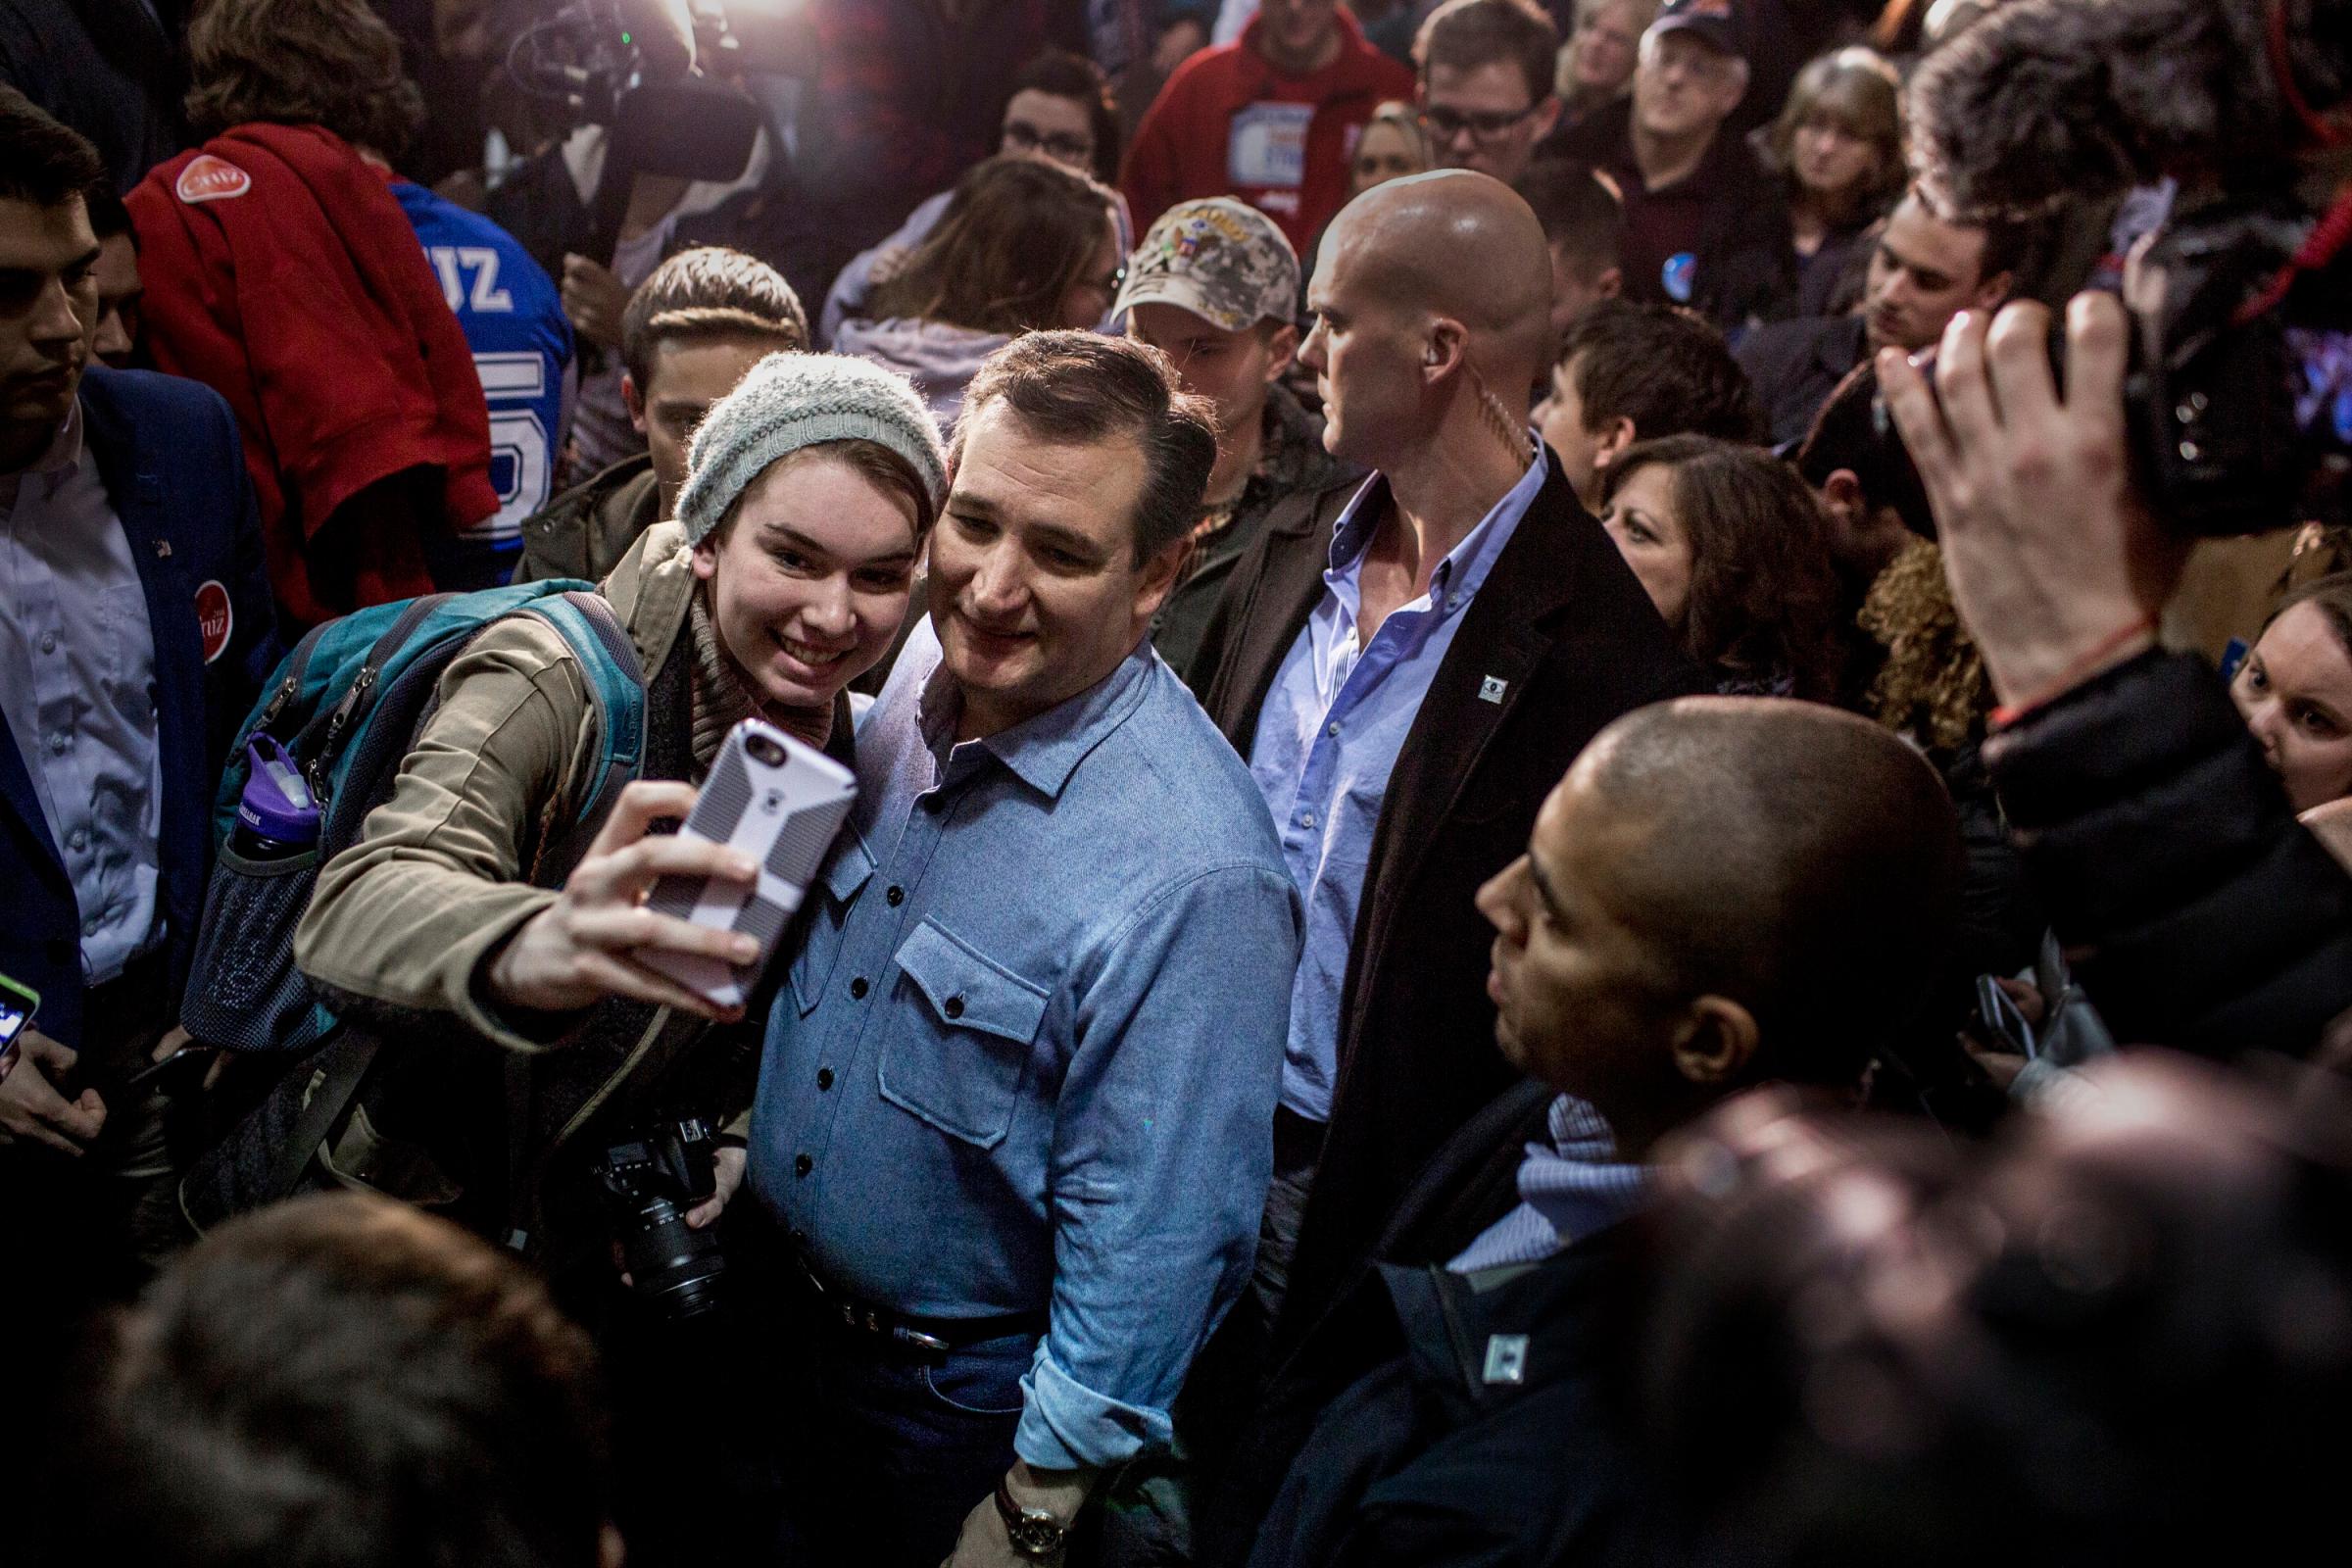 Ted Cruz greets supporters at a rally in Des Moines, Iowa on Jan. 31, 2016.